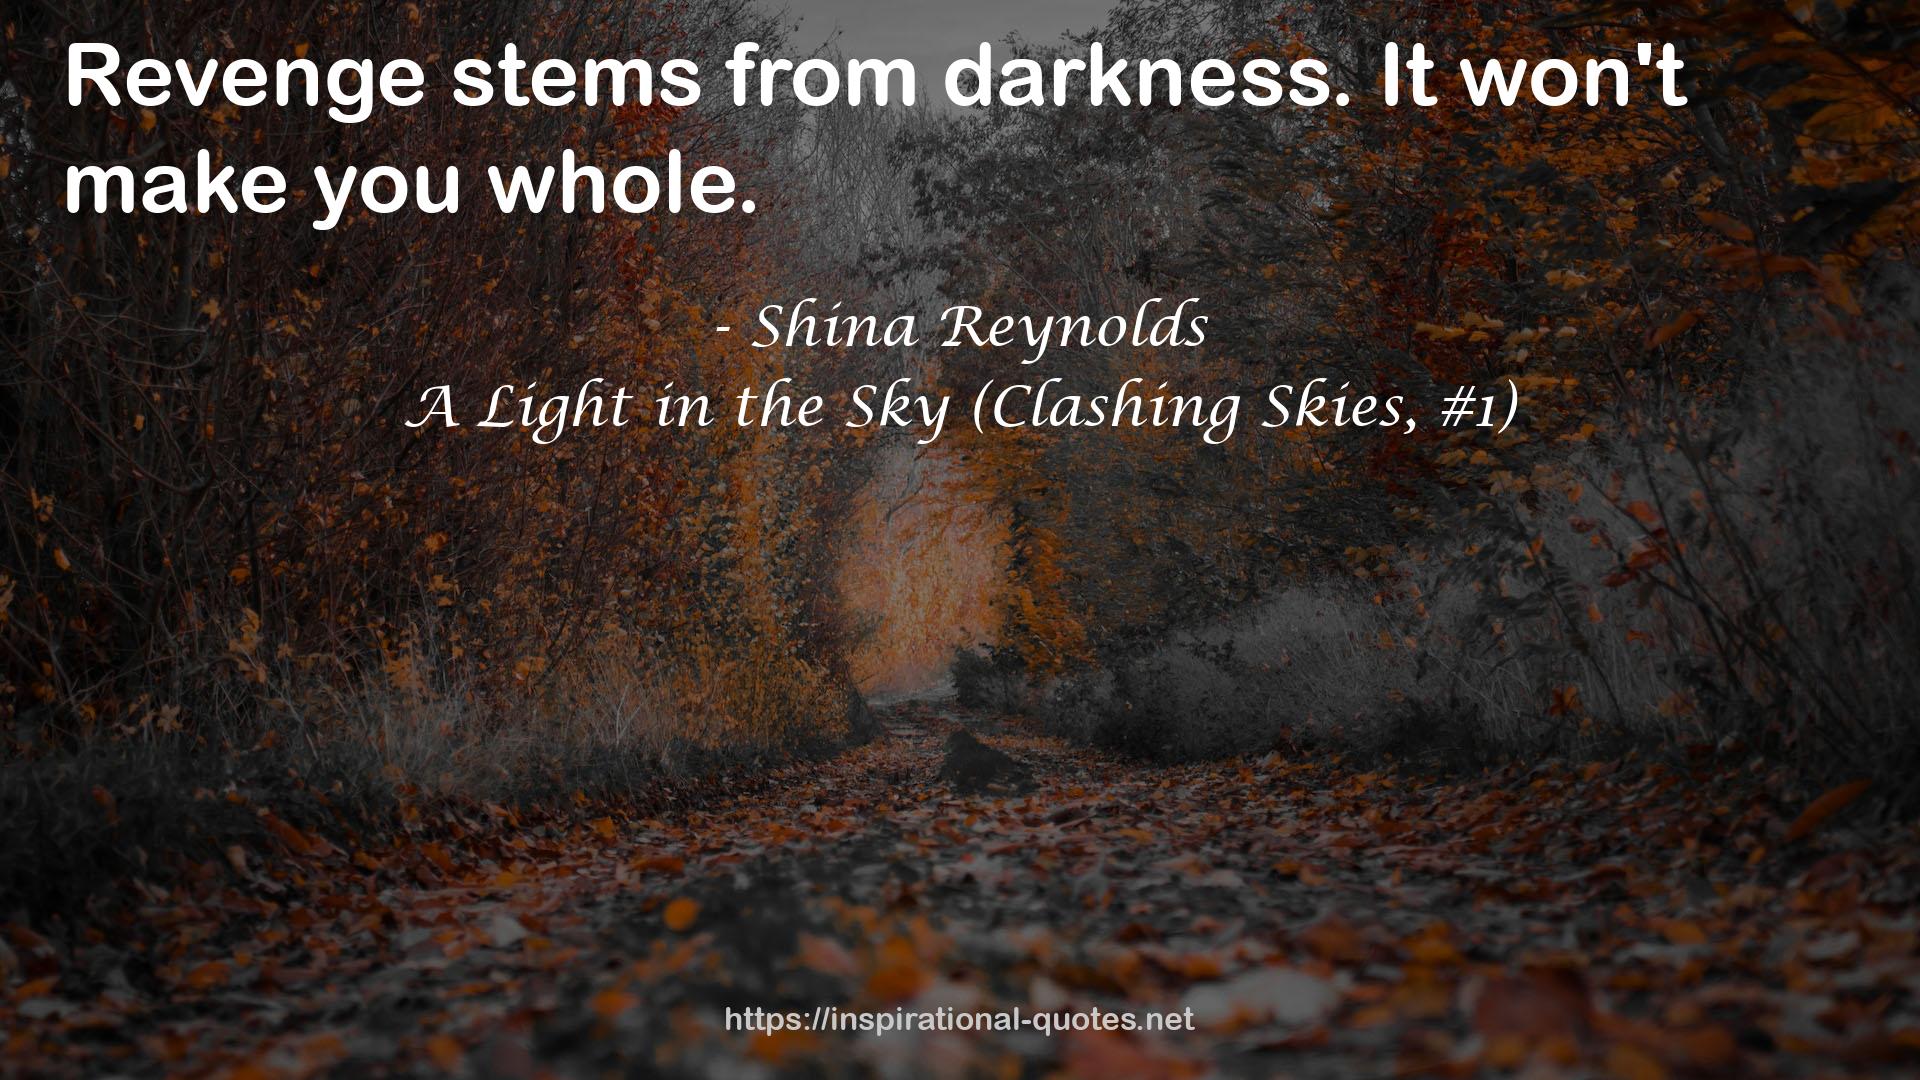 A Light in the Sky (Clashing Skies, #1) QUOTES